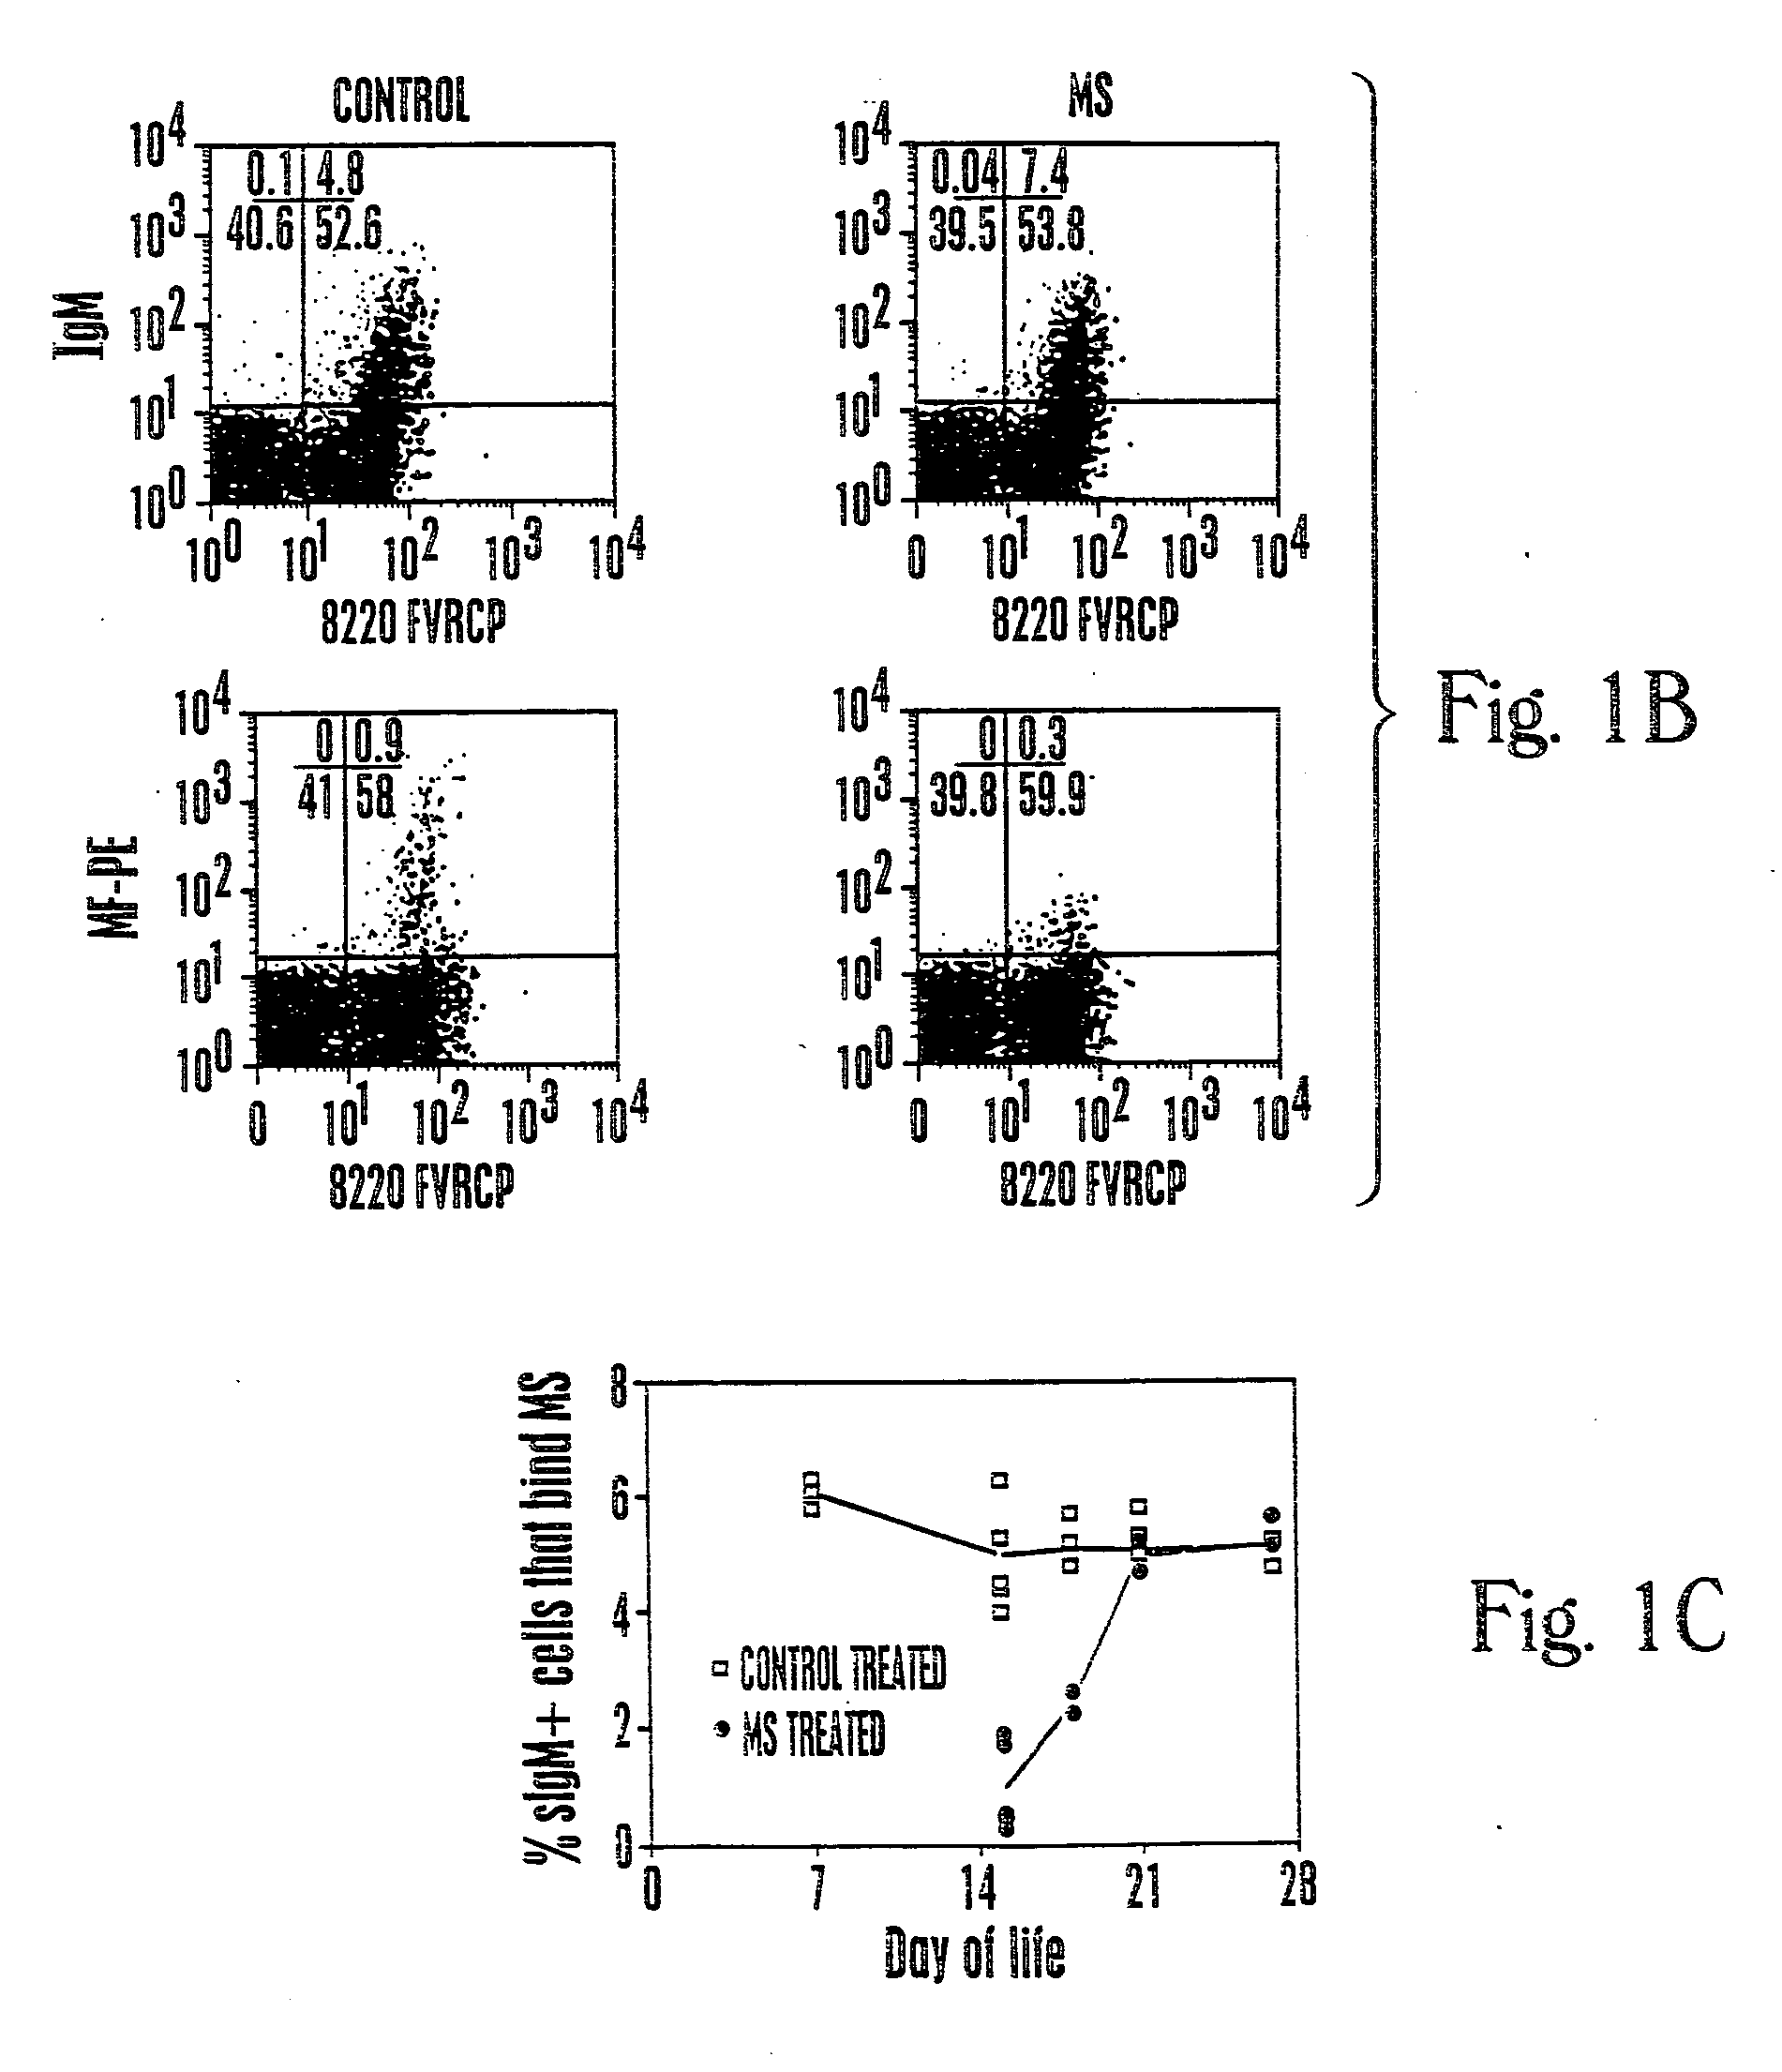 Protein a based binding domains with desirable activities